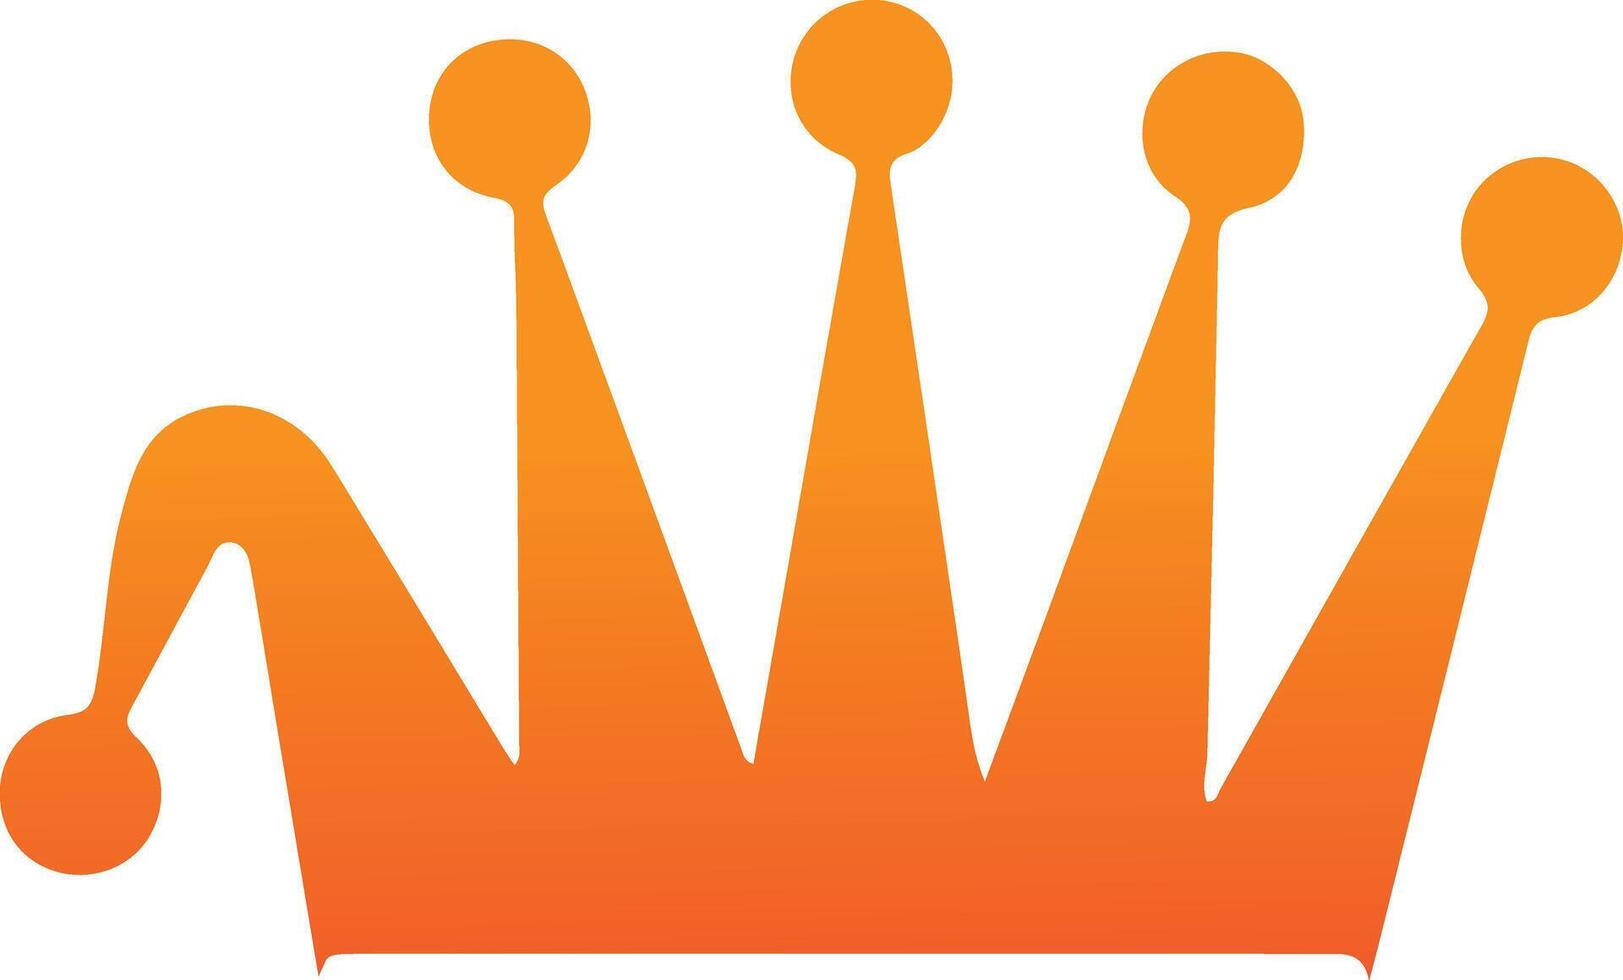 logo for King crown vector